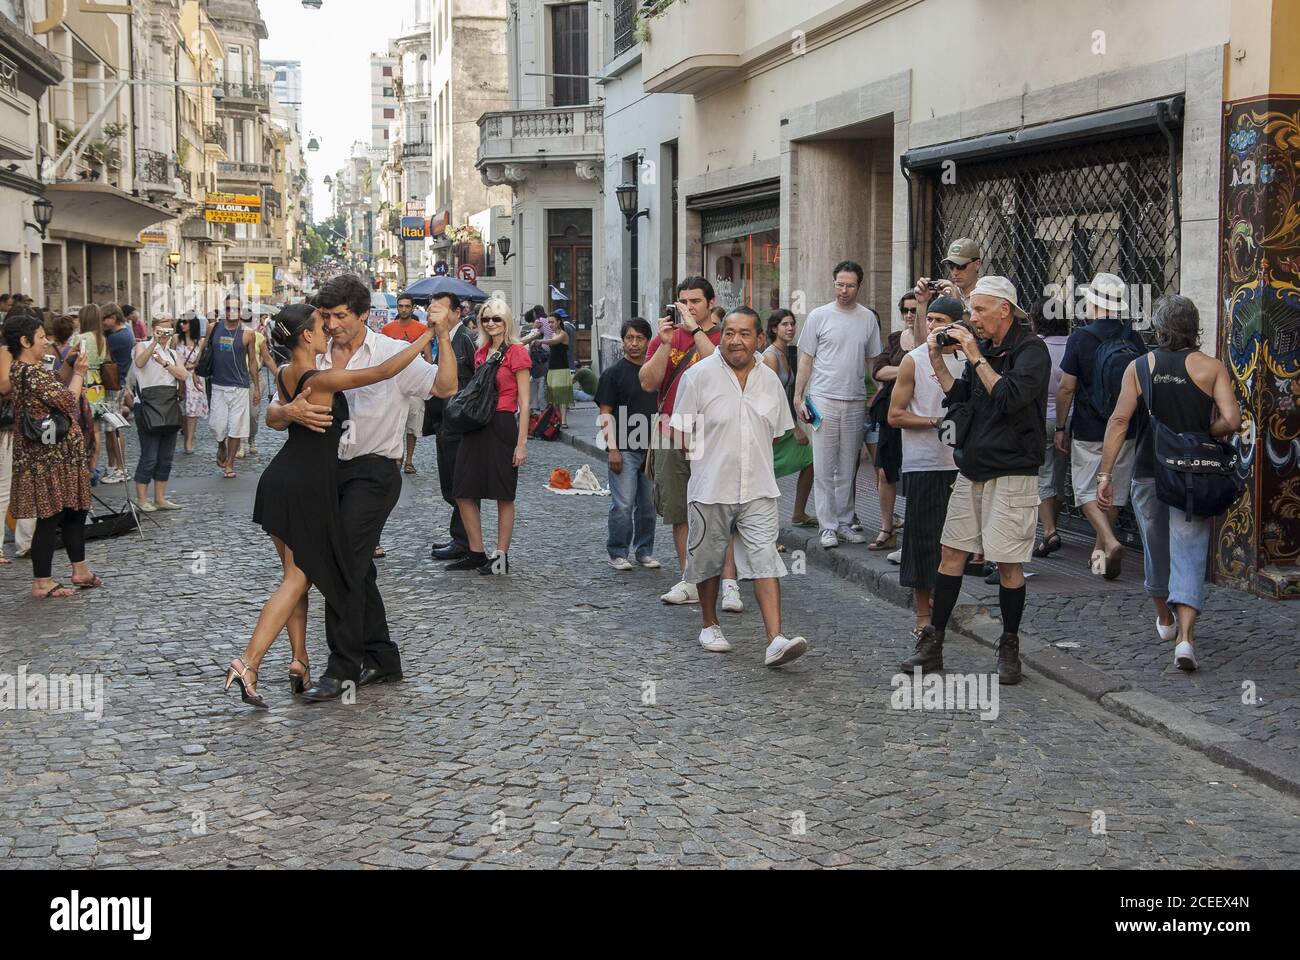 BUENOS AIRES, ARGENTINA - Mar 30, 2009: A couple of dancers does a street tango performance in Defensa Street in San Telmo, the oldest district in Bue Stock Photo